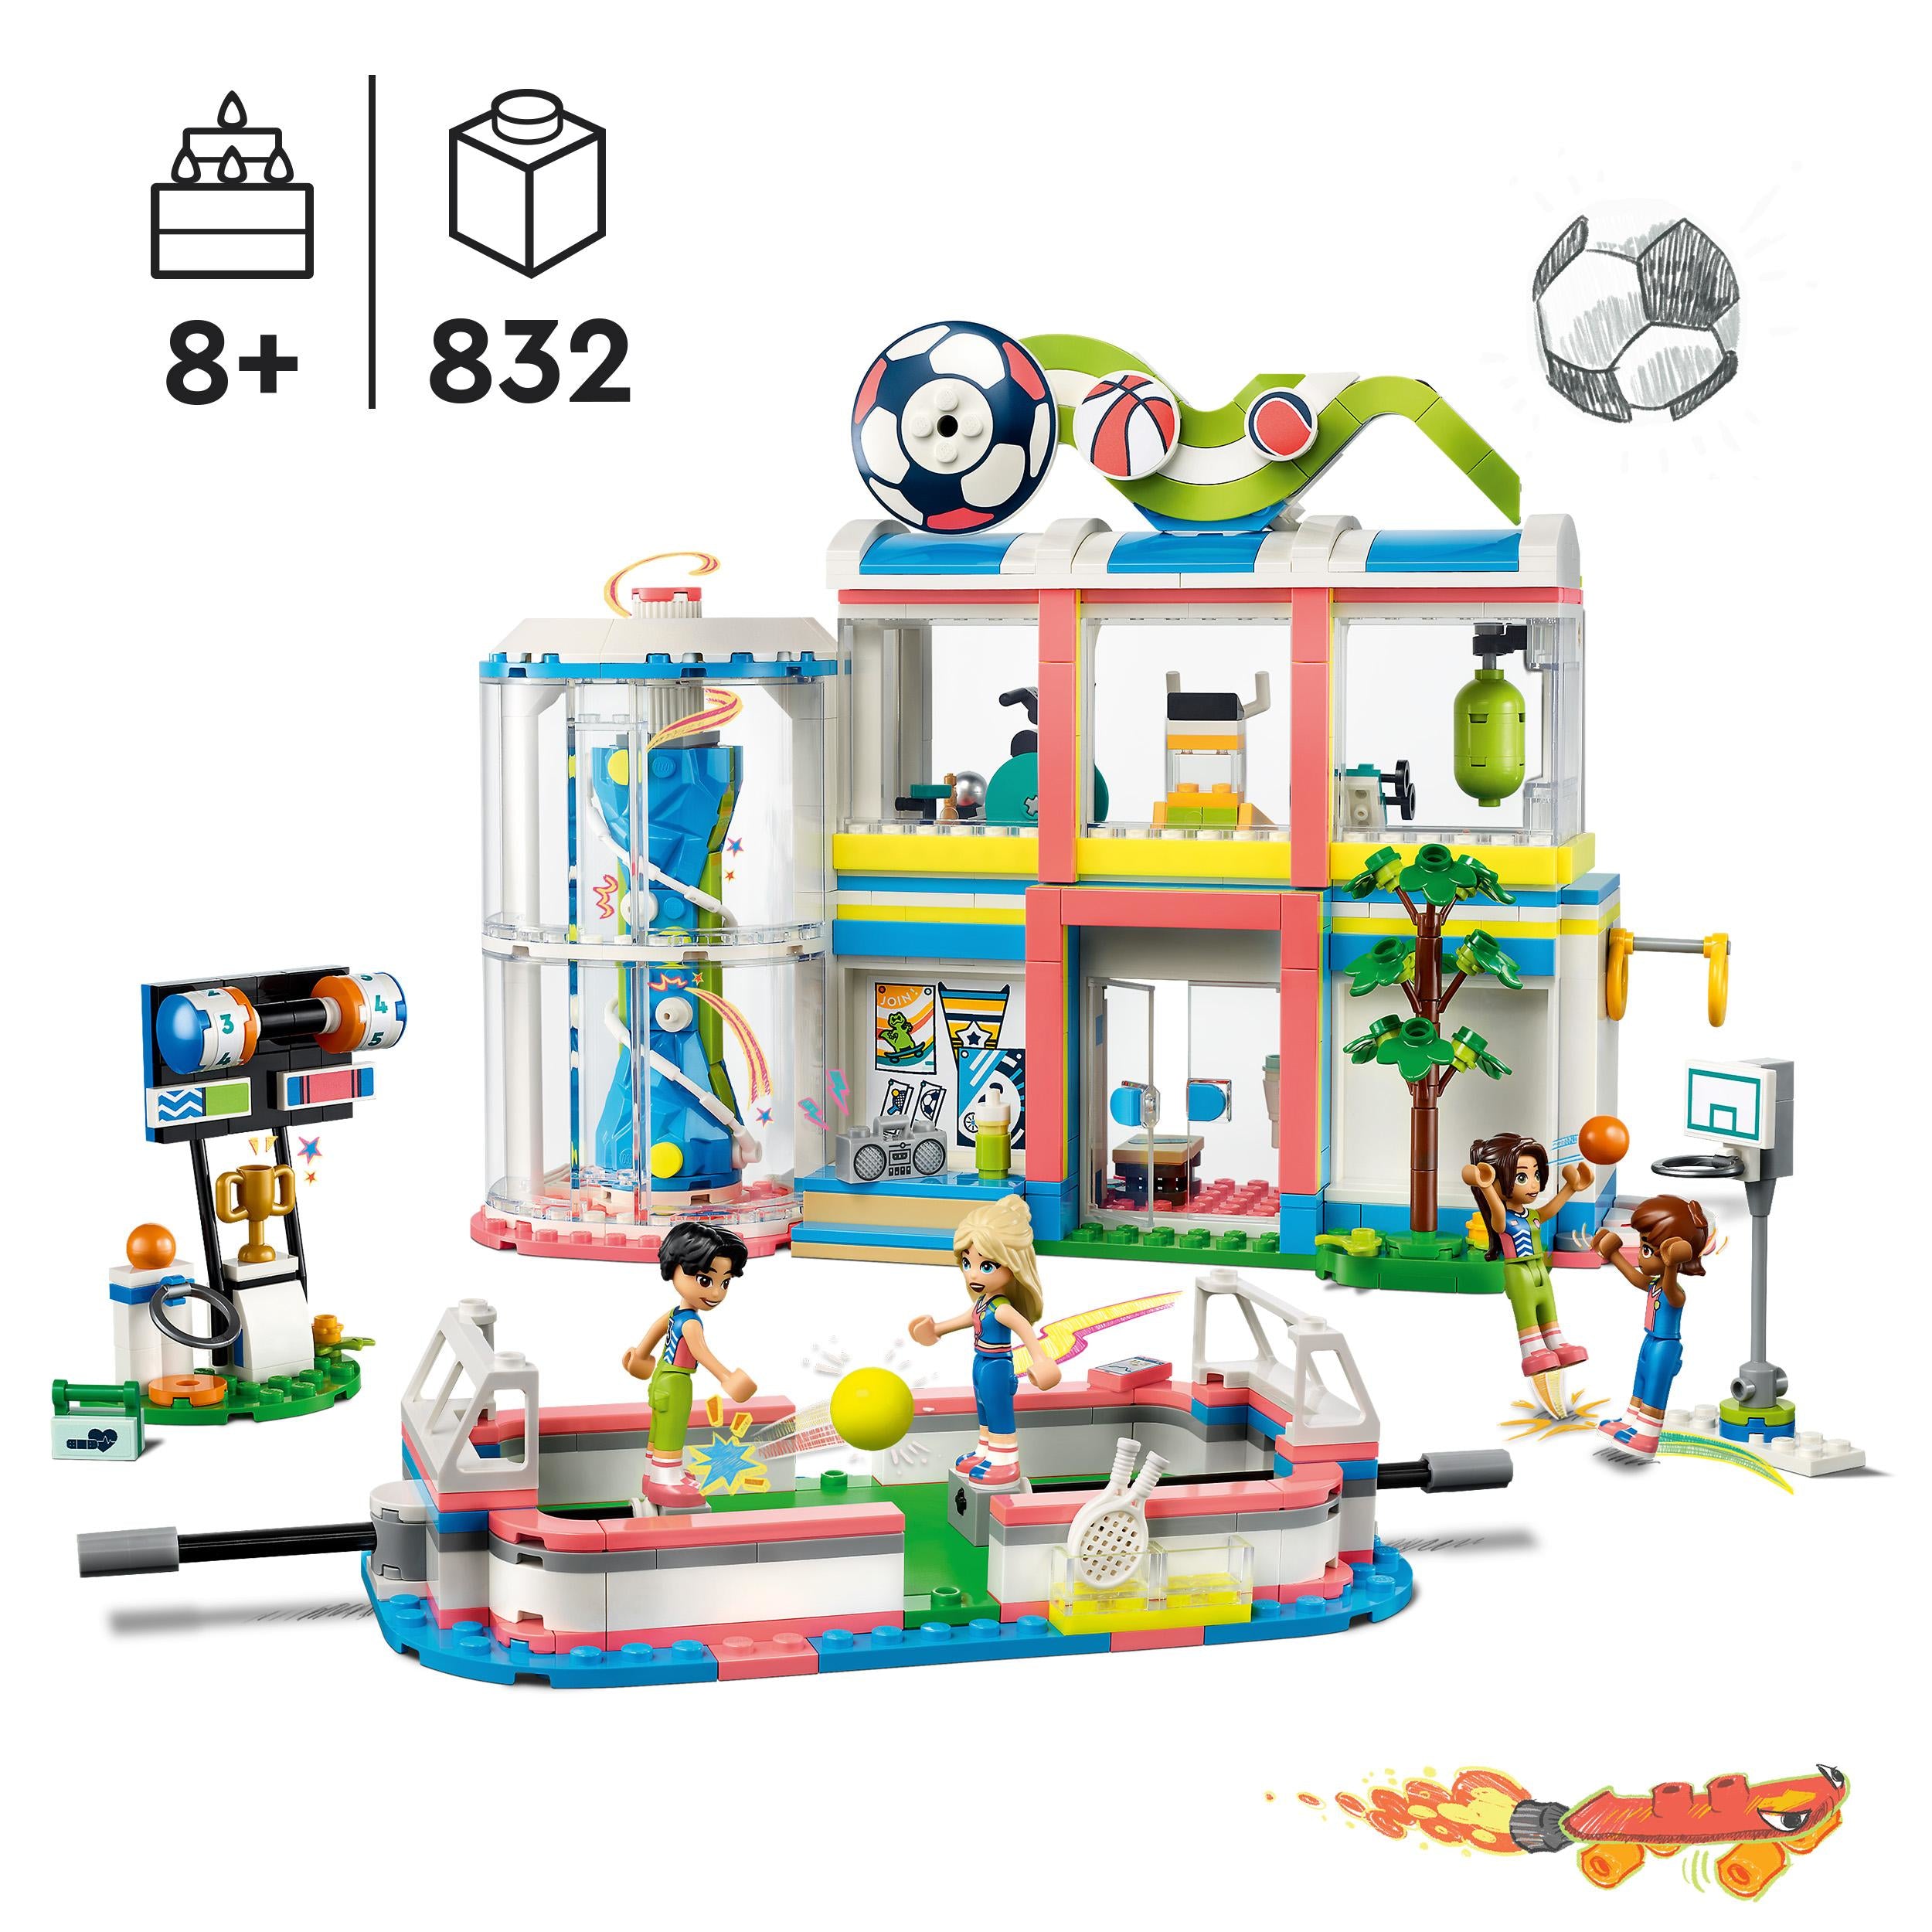 LEGO 41744 Friends Sports Centre Building Toy with Football, Basketball and Tennis Games To Play plus Climbing Wall and 4 Mini-Dolls, Heartlake City Gift for Kids Age 8 Plus